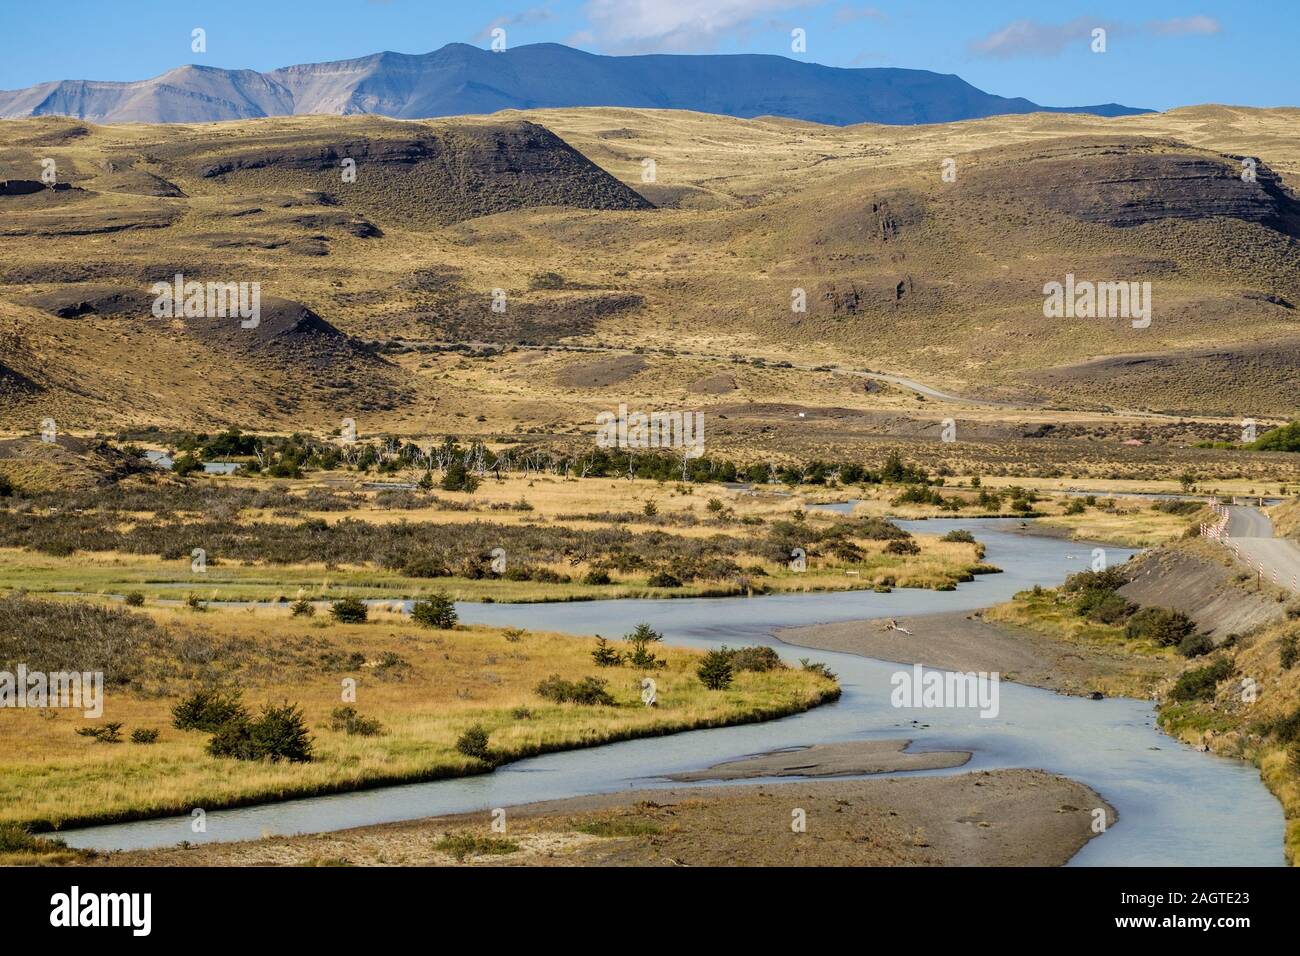 A river with pure water finds a way through the arid landscape near Torres del Paine in Chile. Stock Photo